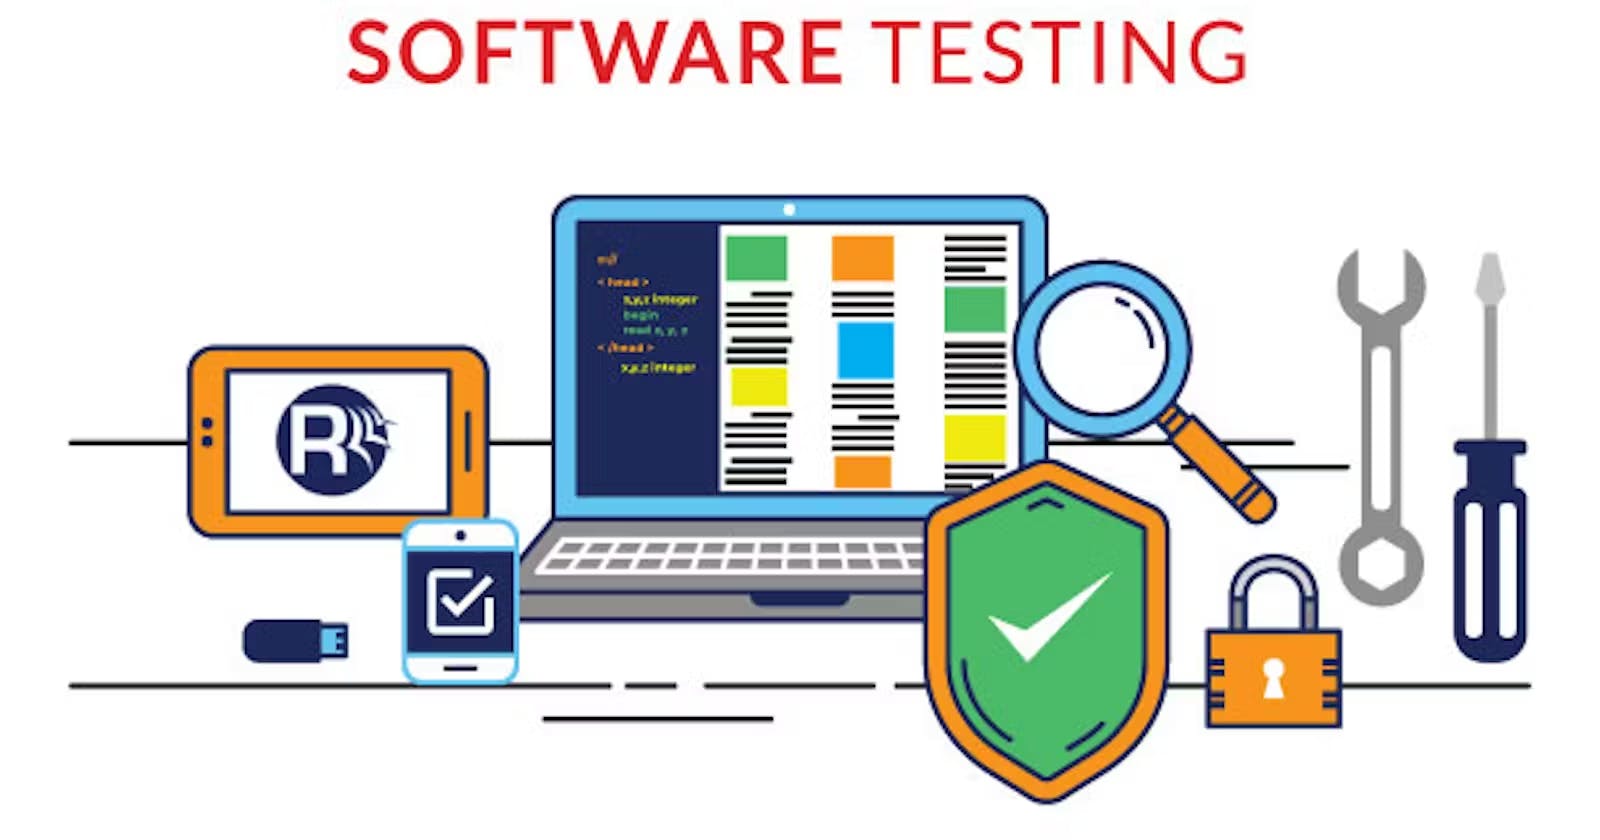 Fortifying Your Software: The Ultimate Guide to Security Testing